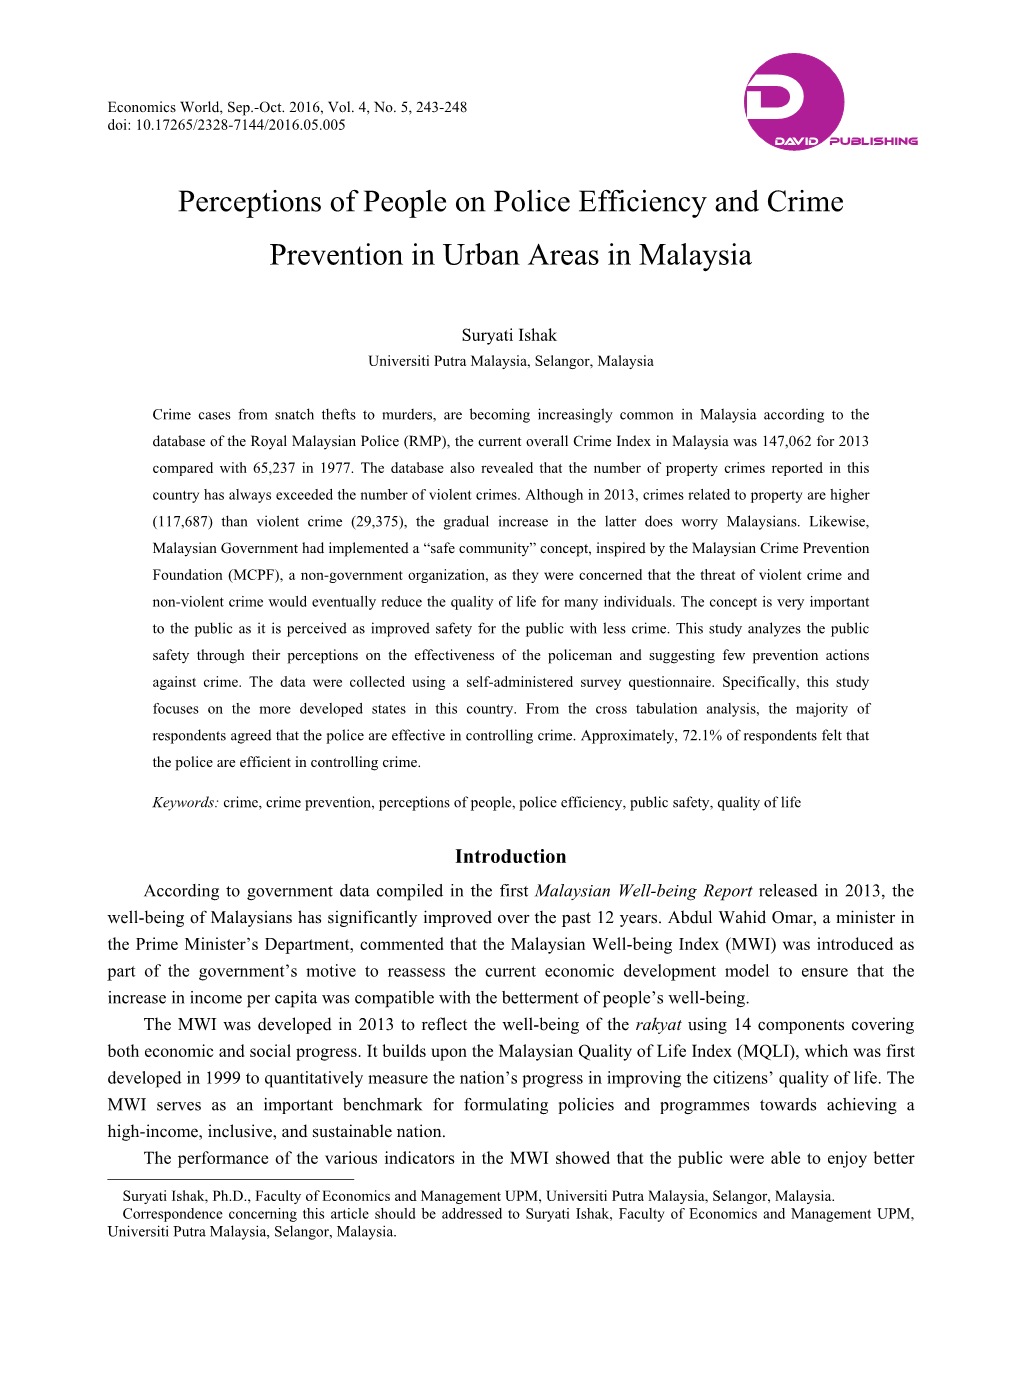 Perceptions of People on Police Efficiency and Crime Prevention in Urban Areas in Malaysia